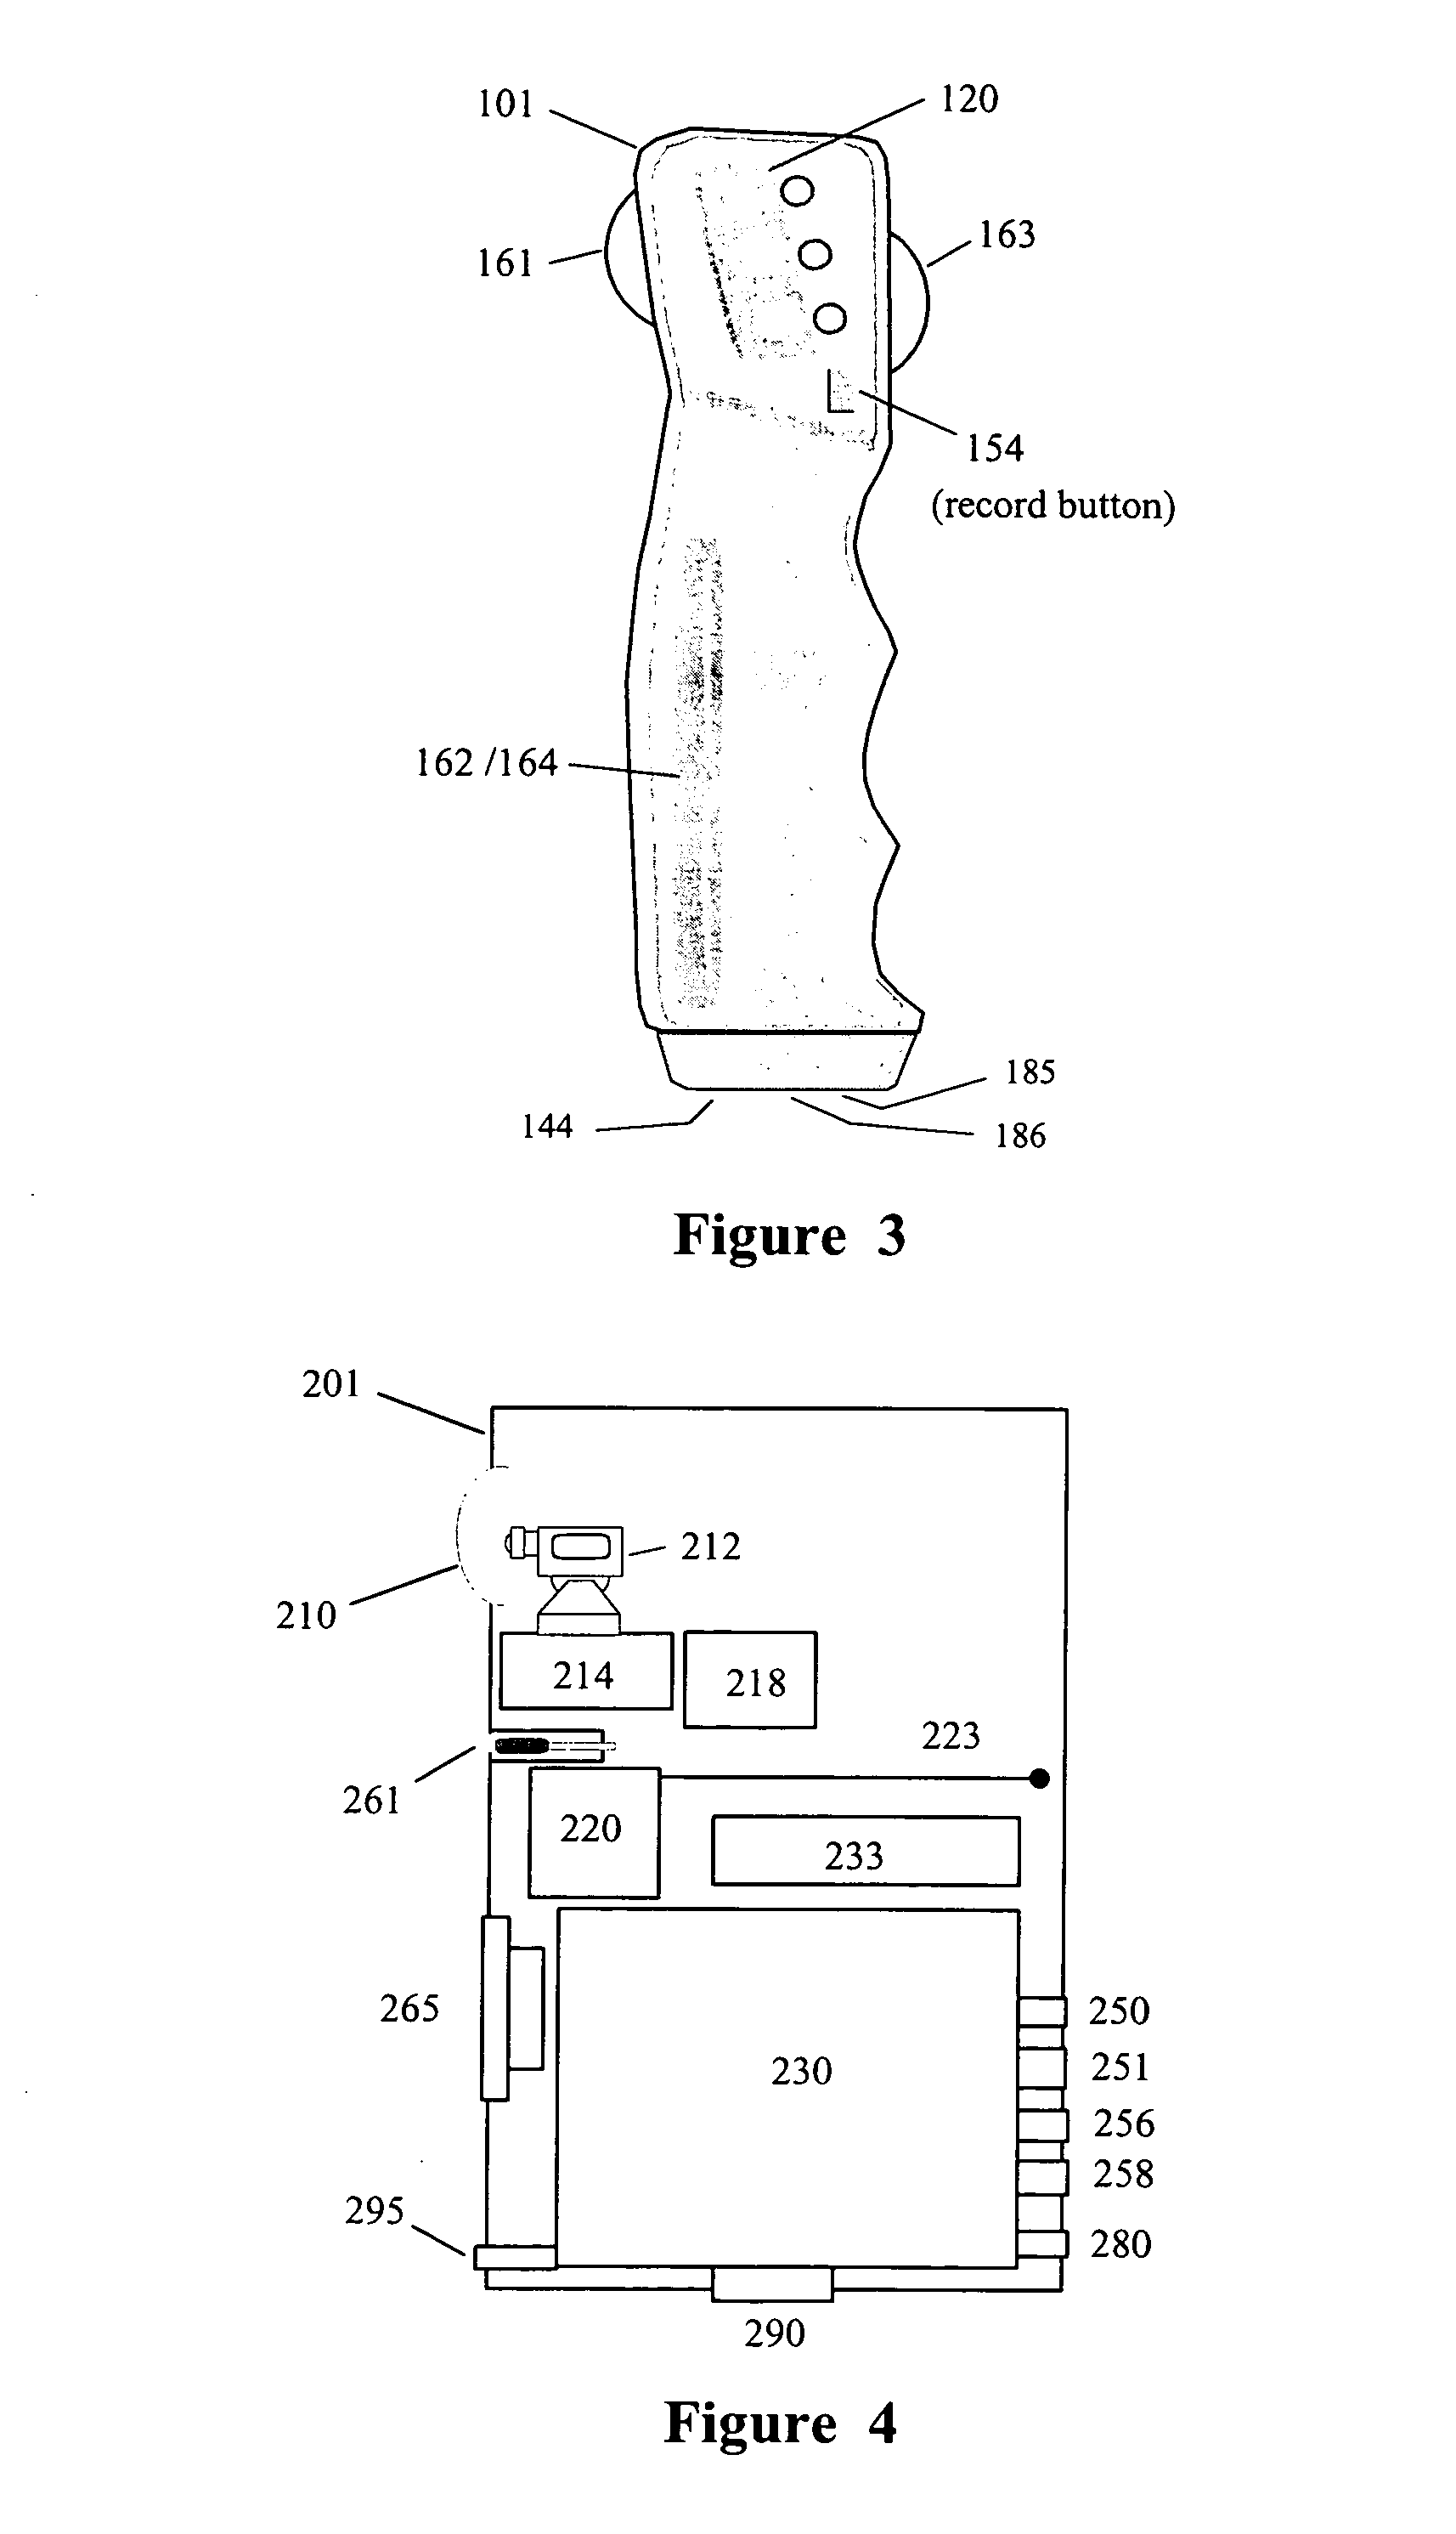 Electronic variable stroke device and system for remote control and interactive play